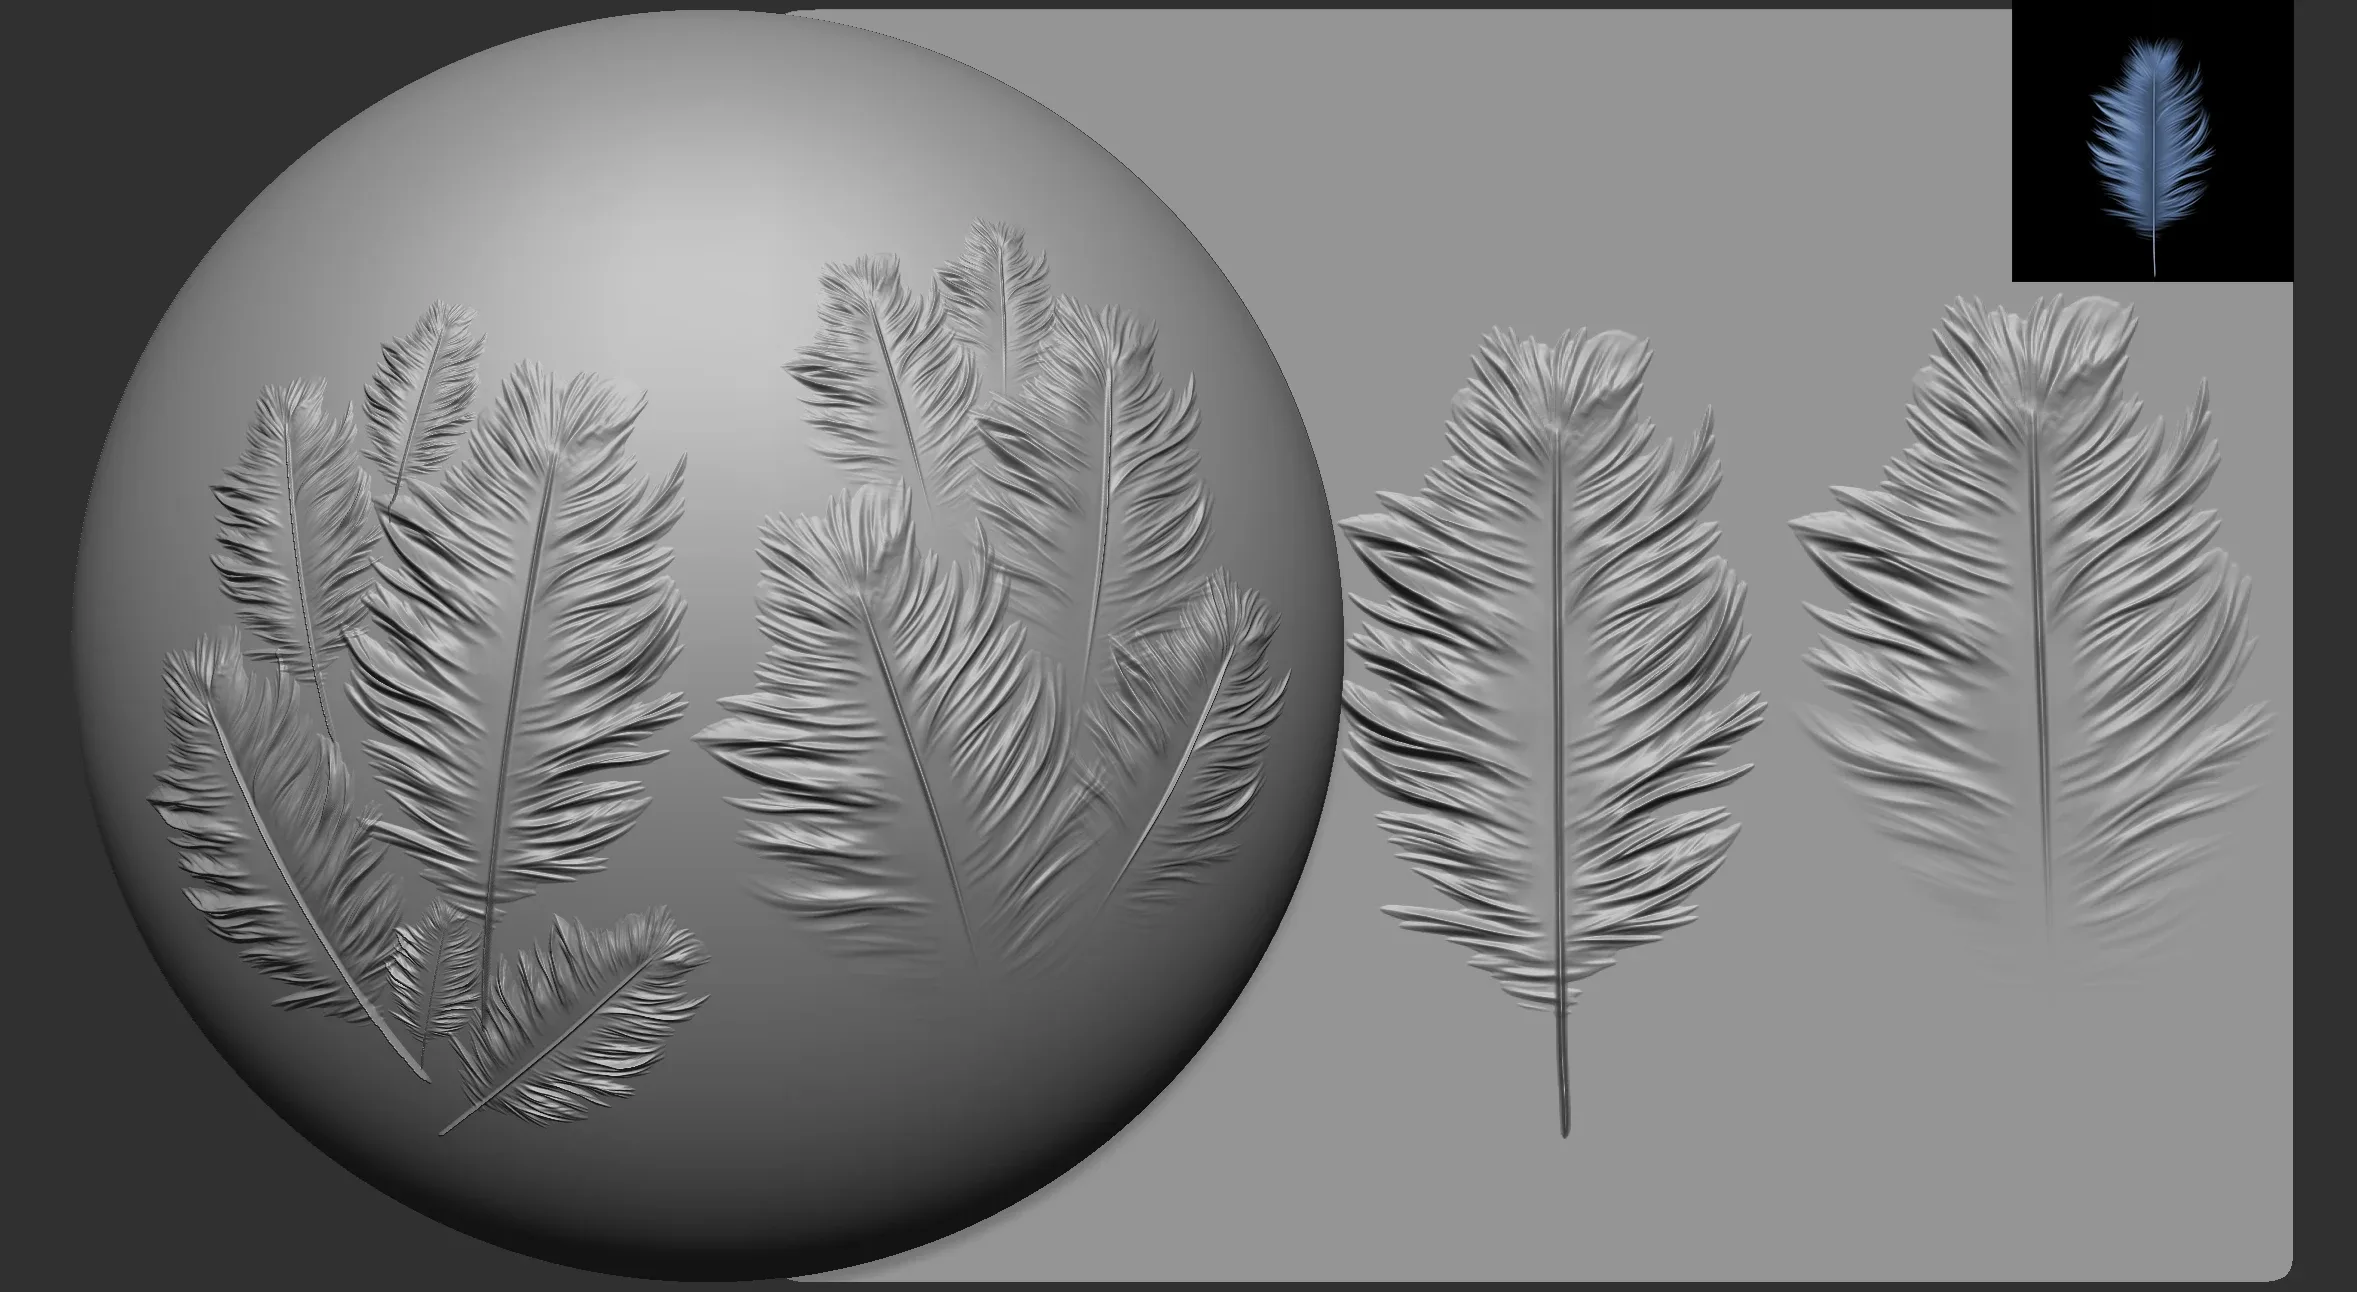 40 Fantasy Feathers | Alphas, Displacement, Diffuse